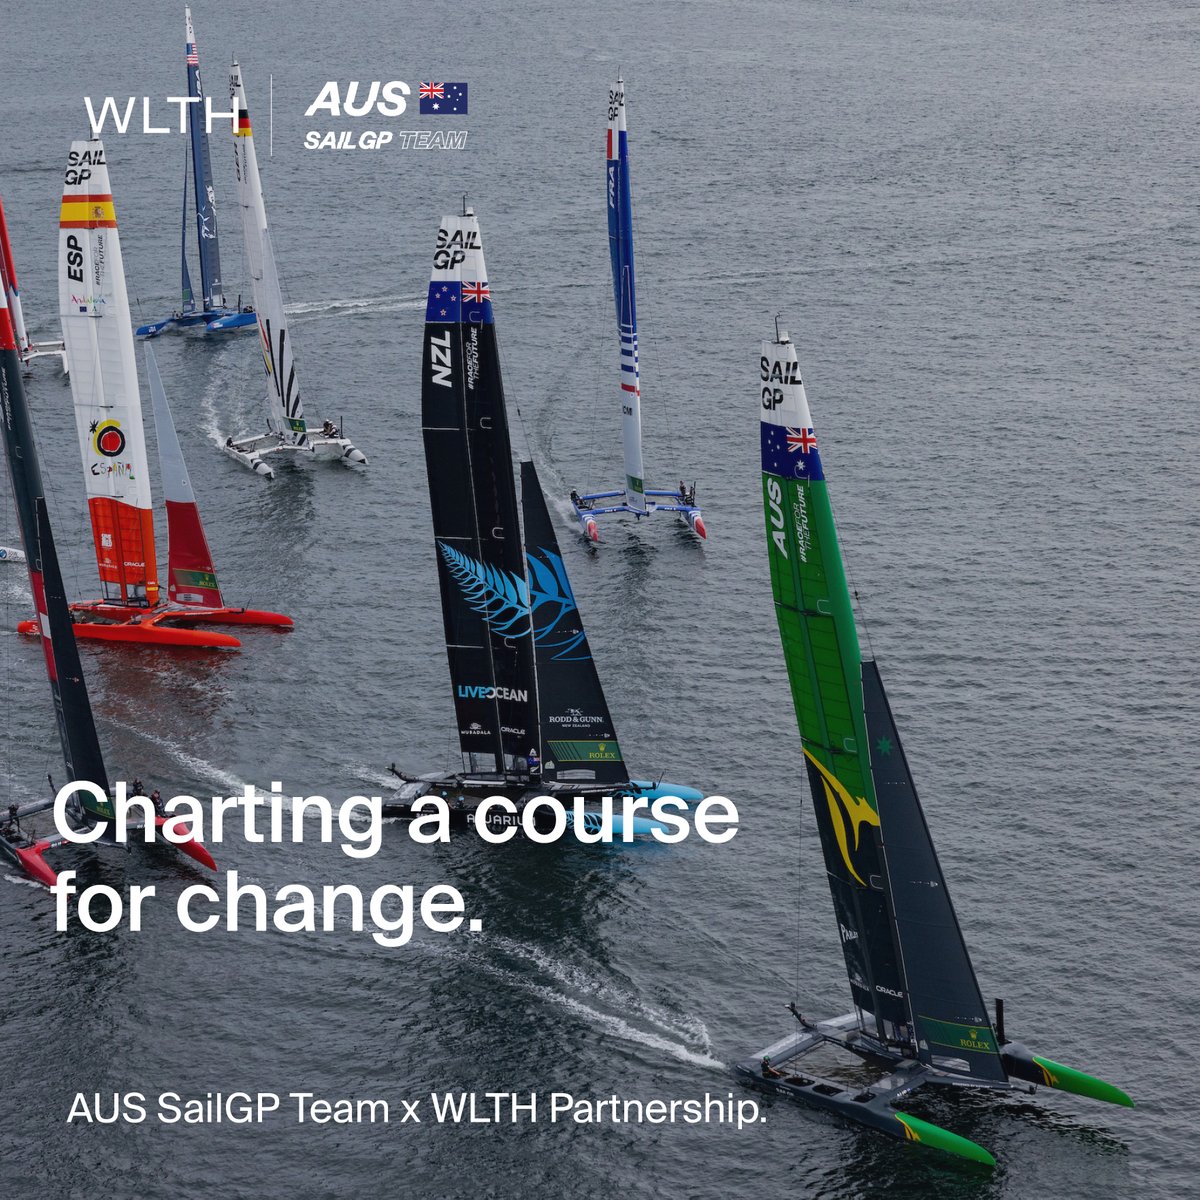 Together with our partners, we aim to make an impact for a brighter tomorrow for future generations. Find out more about our partnership on the Impact section of our website.

#loansfortheoceans #plasticfree #sailgp